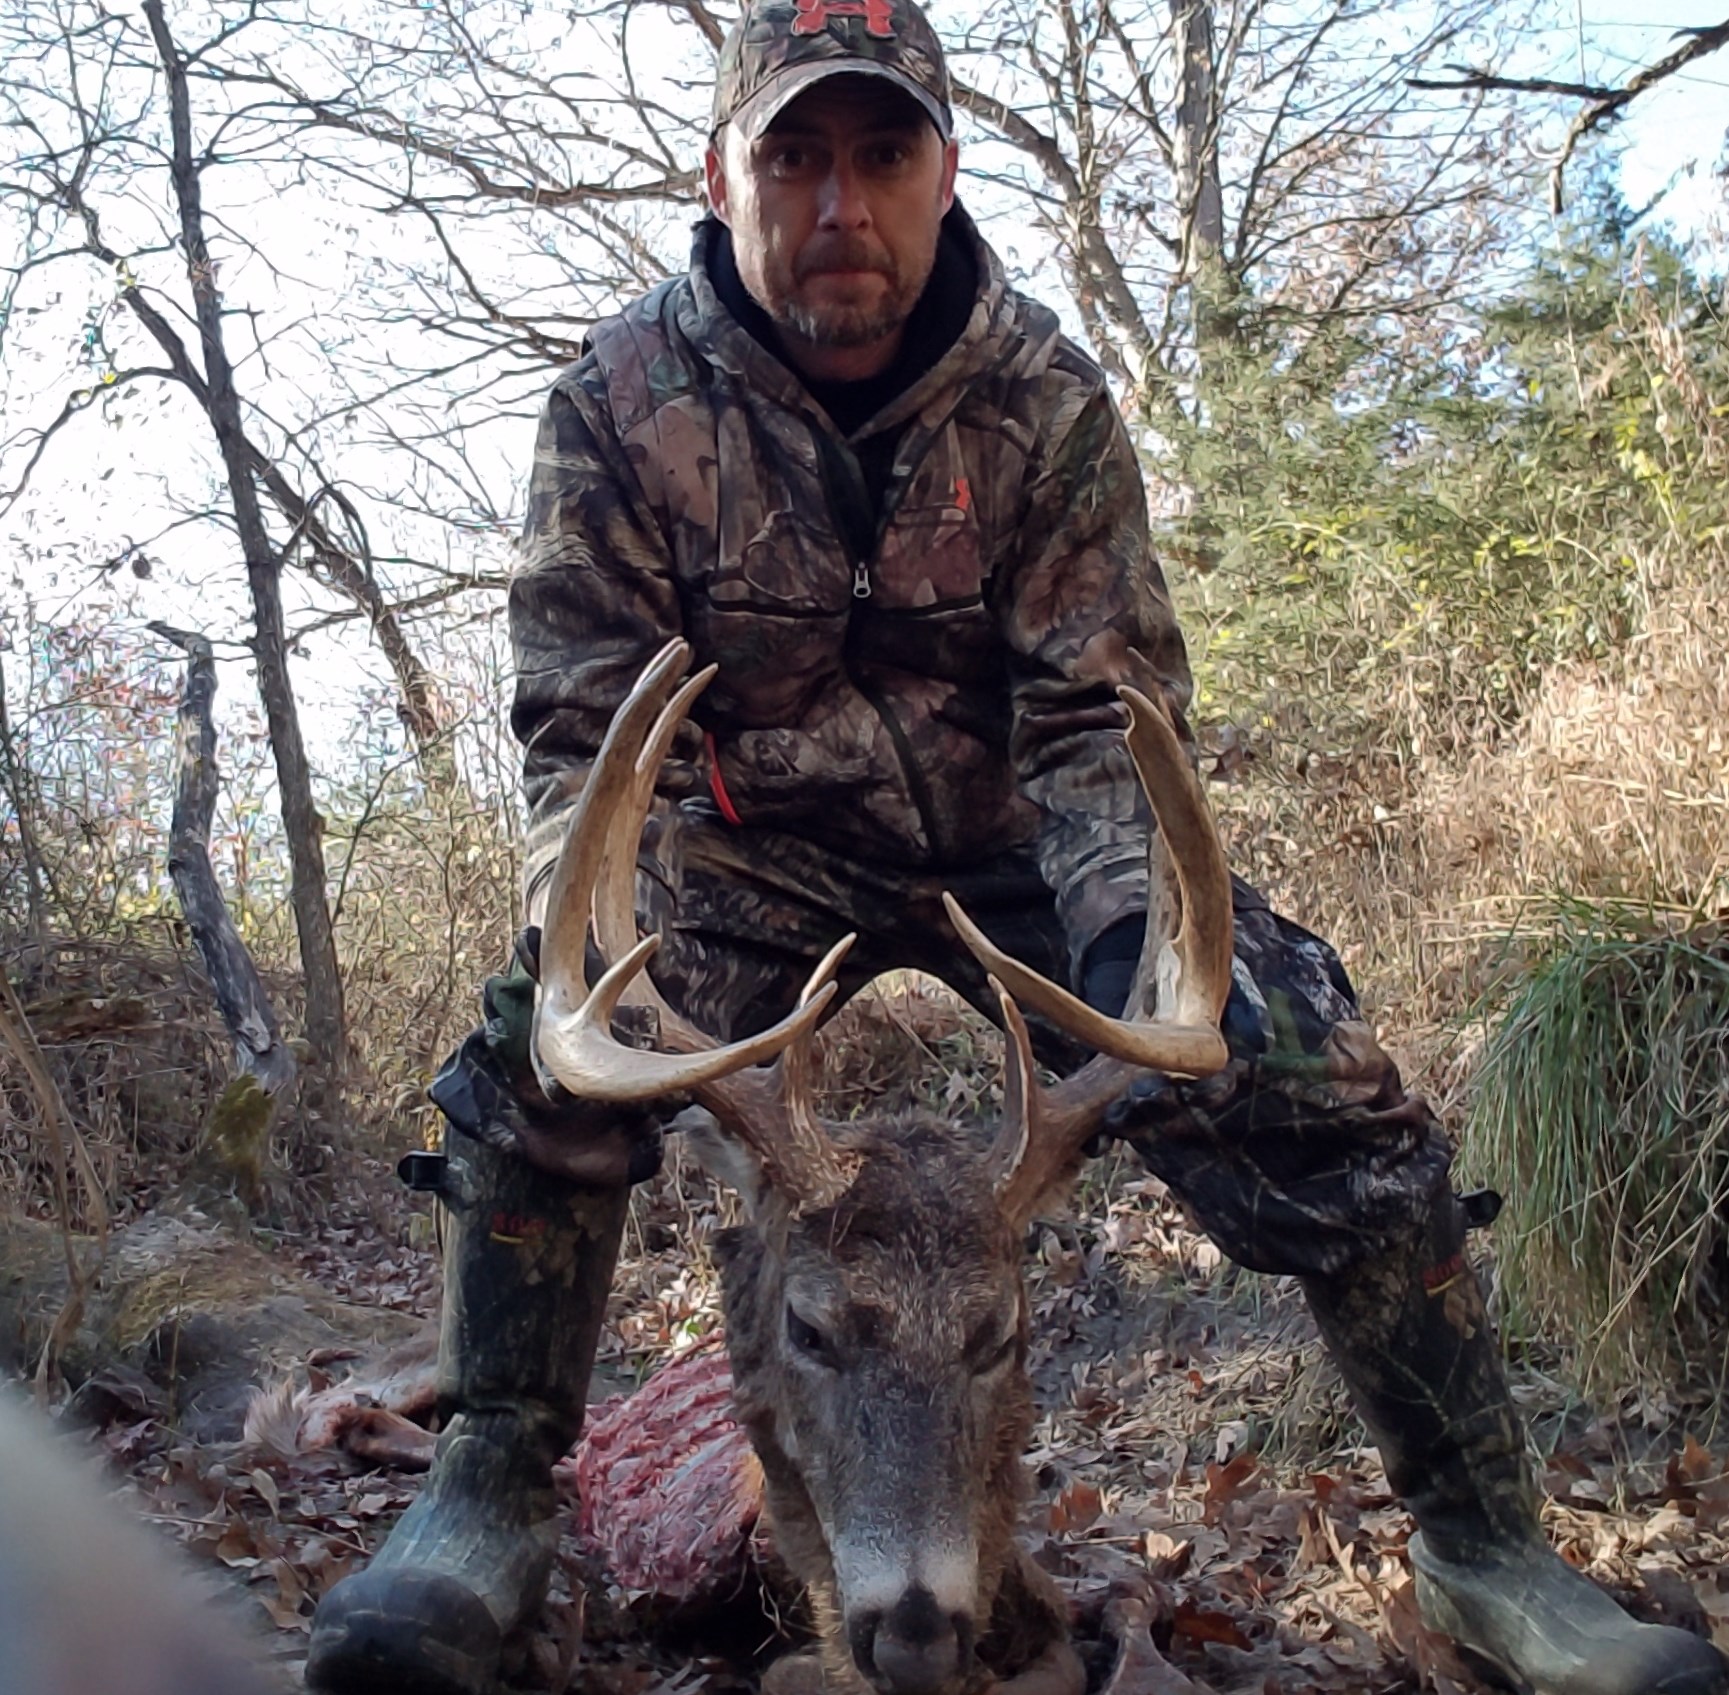 By the time Joel found this great buck, a pack of coyotes had found him first. Nothing was left from the head down.